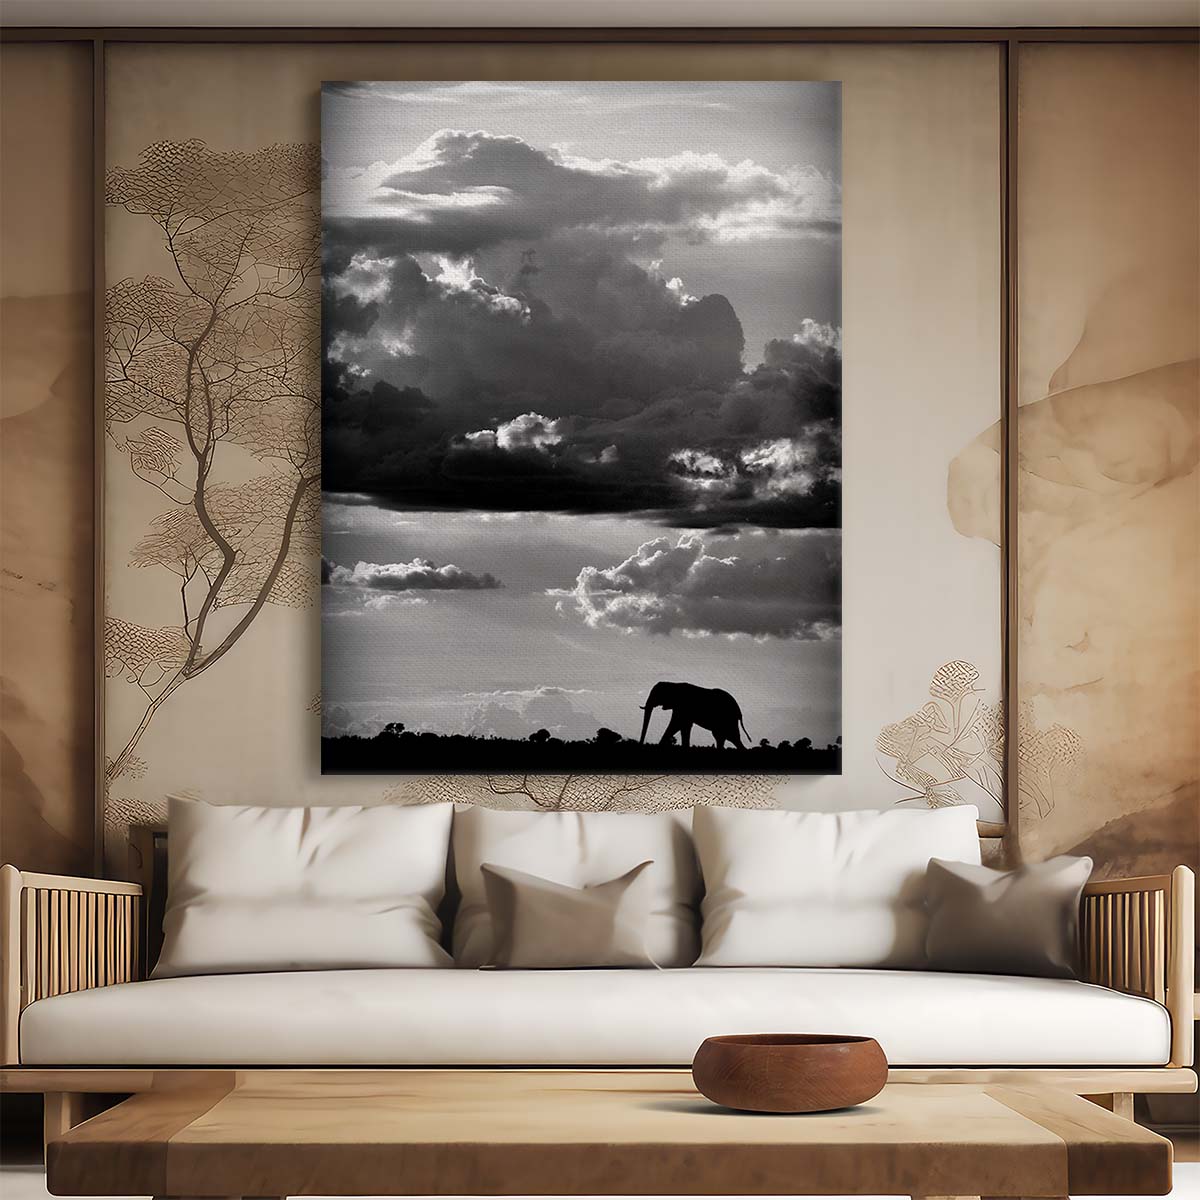 Majestic African Elephant Photography Artwork in Monochrome, Safari Wildlife Scene by Luxuriance Designs, made in USA